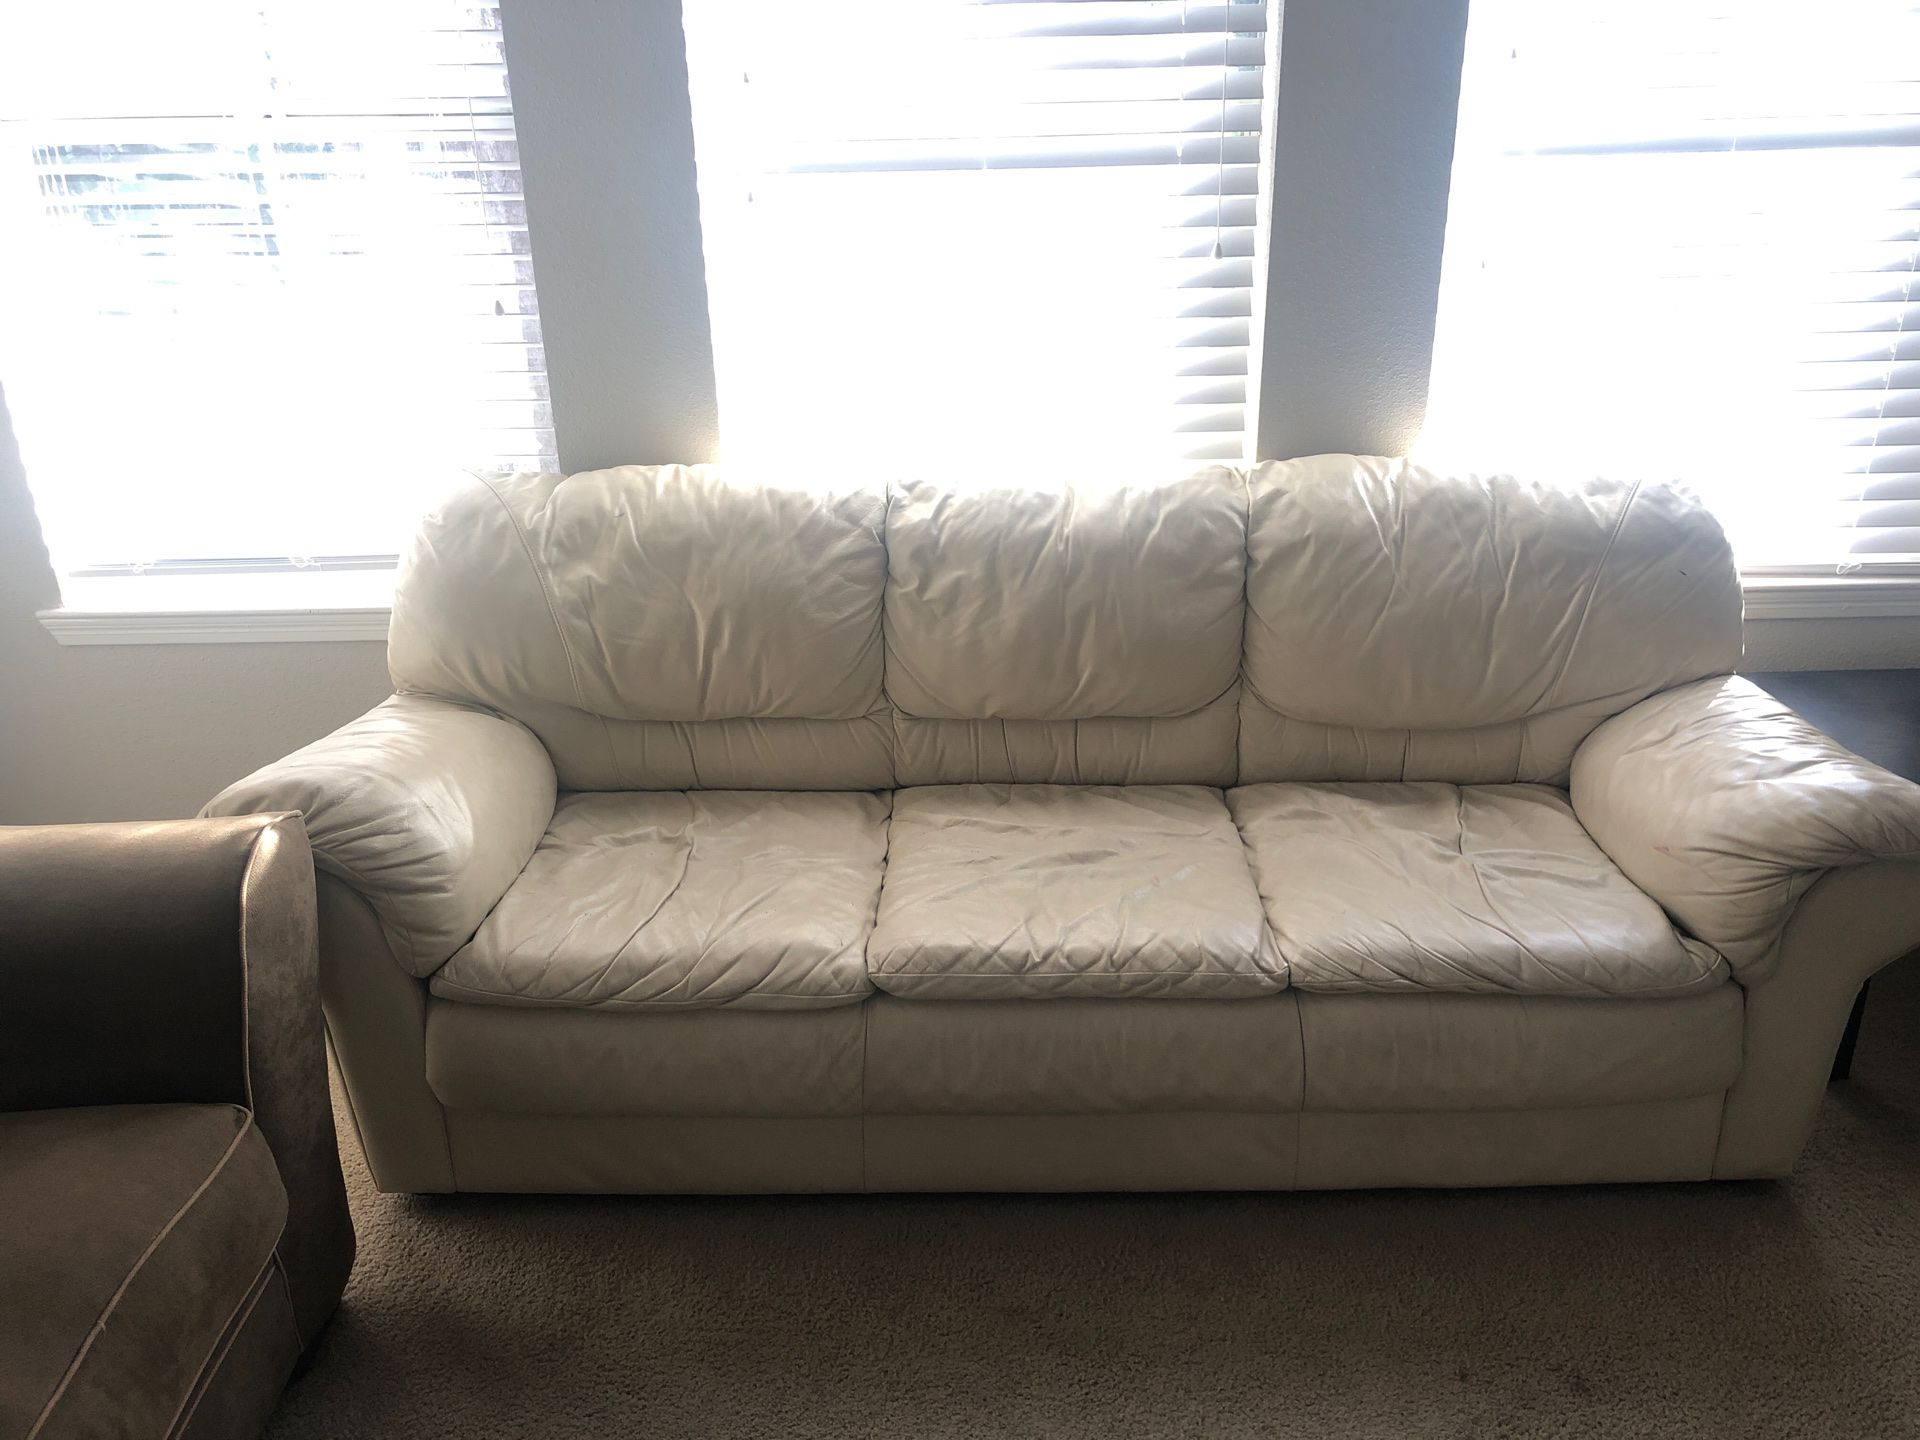 Couch for Sale! $50 or best offer!